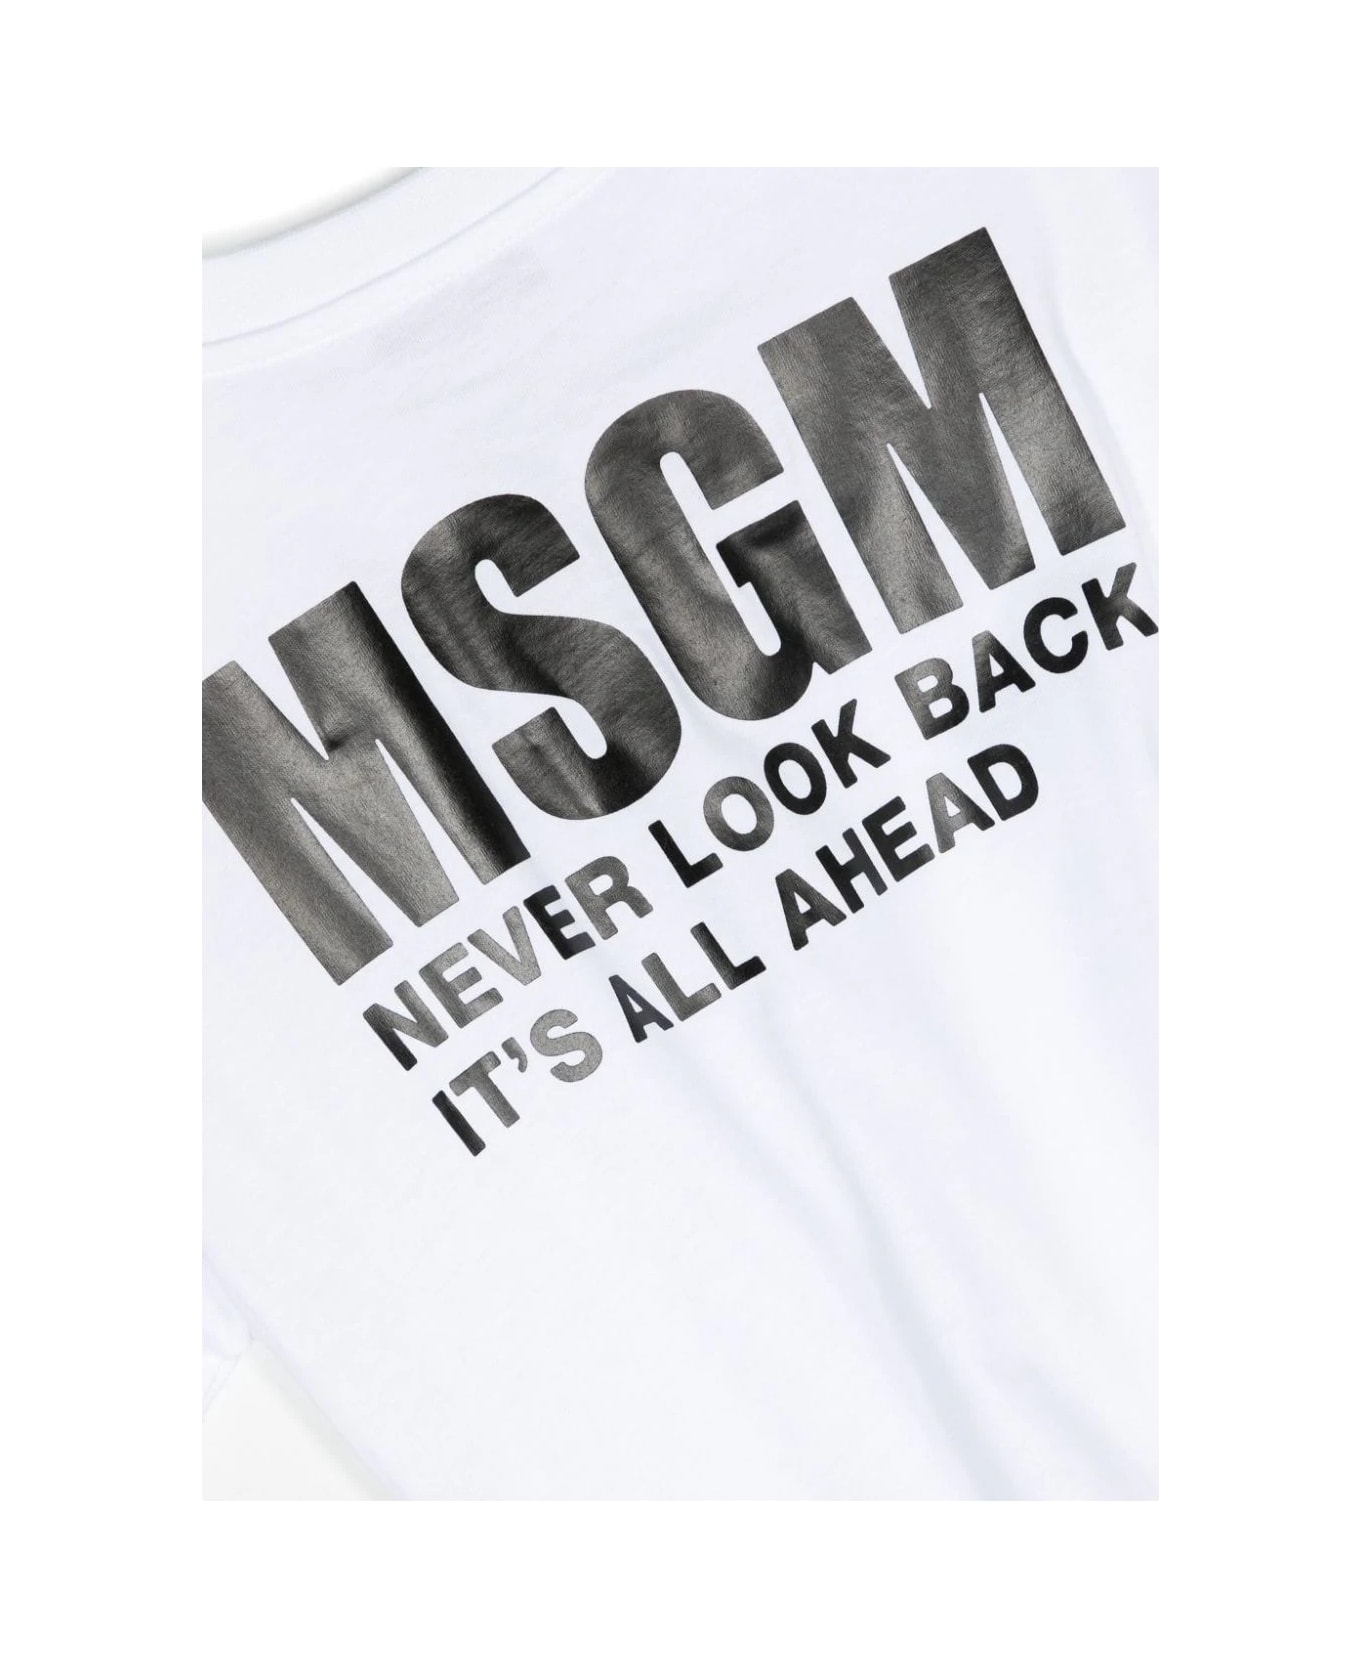 MSGM White T-shirt With Front And Back Logo